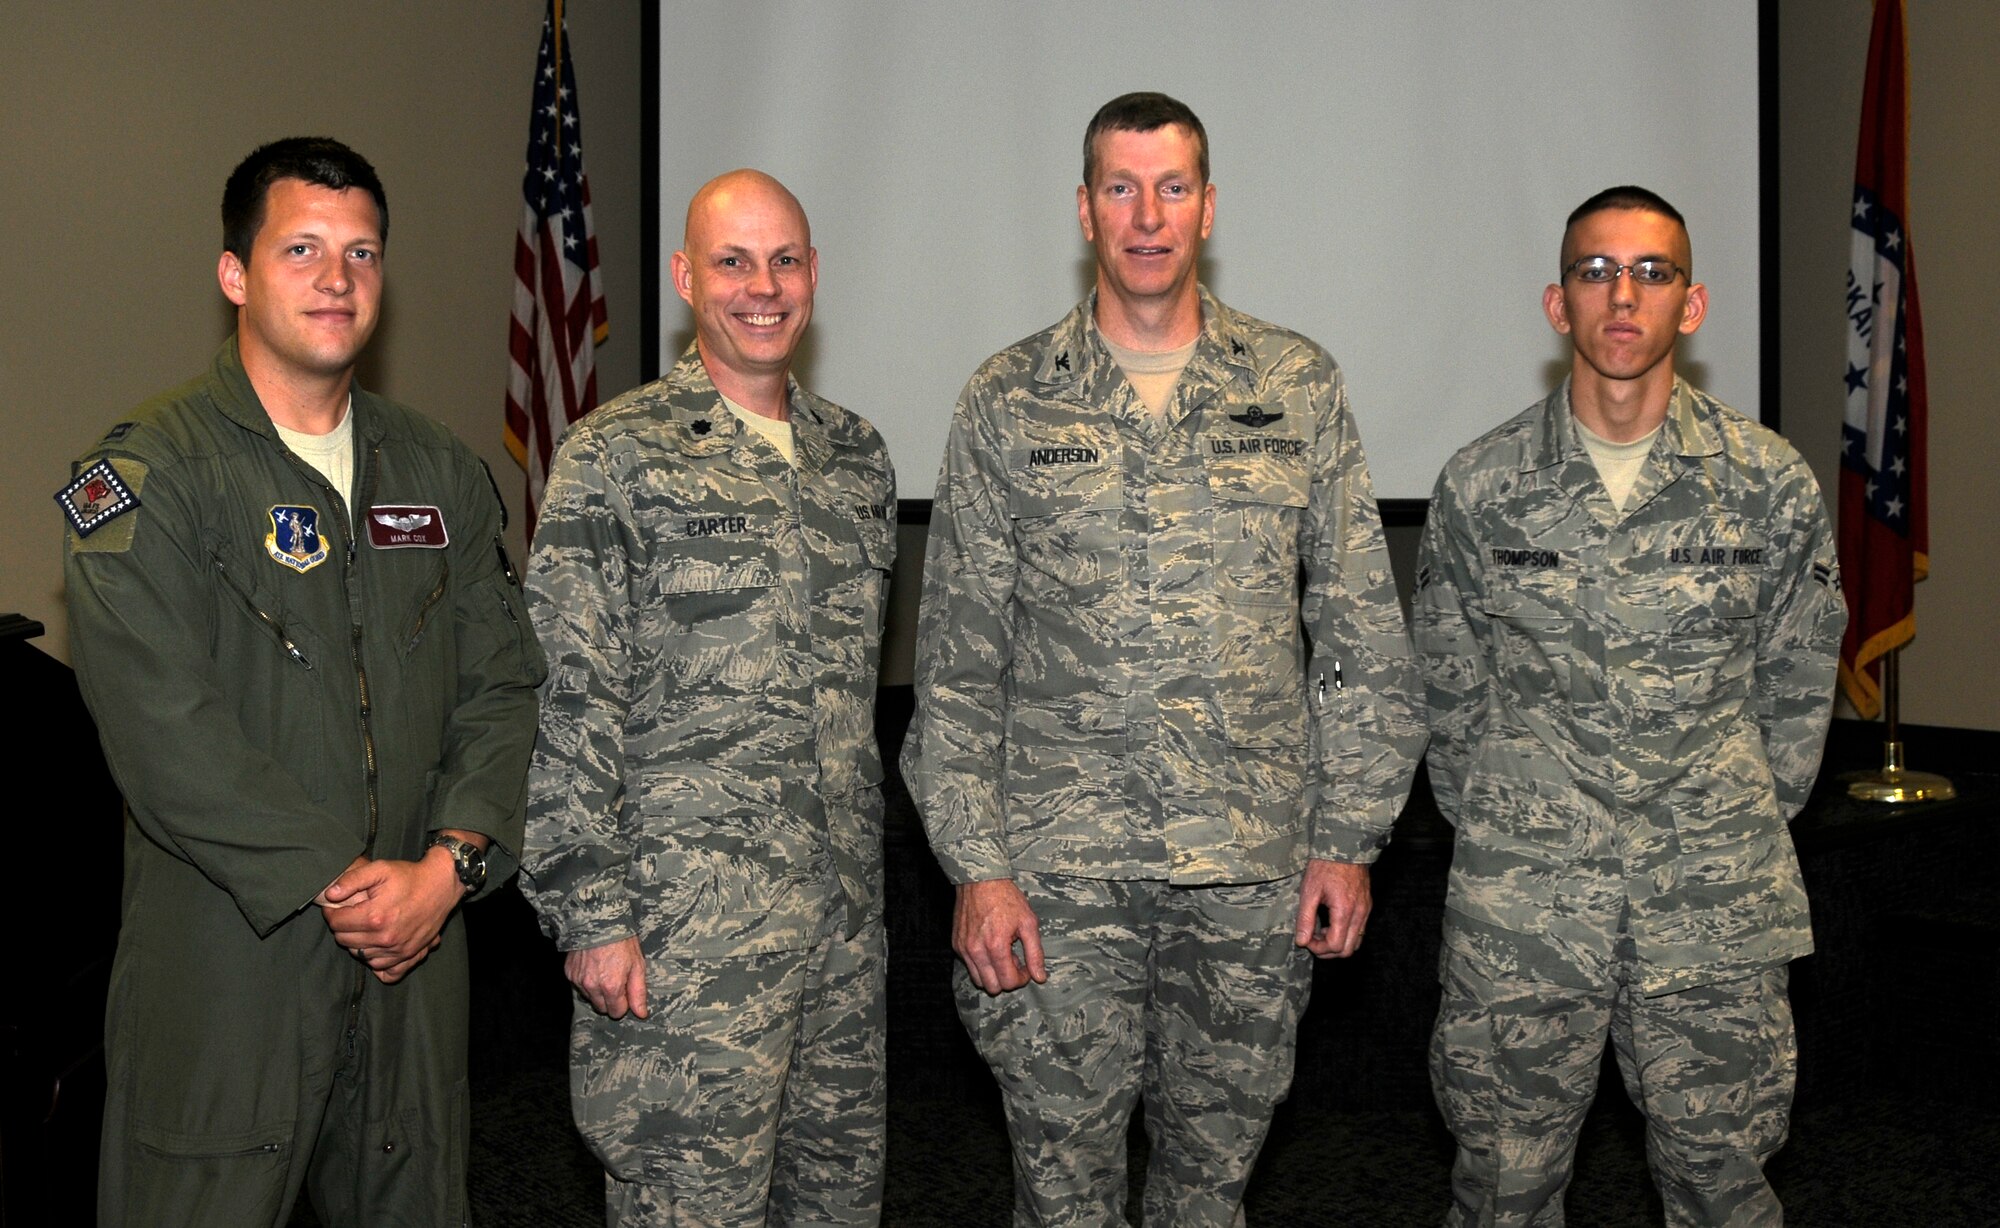 From left: Capt. Mark Cox, 188th Operations Group; Lt. Col. Brian Carter, 188th Fighter Wing Staff; Col. Mark Anderson, 188th Fighter Wing commander; Airman 1st Class Adam Thompson, 188th Maintenance Group. Not pictured: Staff Sgt. Rachel Ponder, 188th Communications Flight; 2nd Lt. Laura Delgado, 188th Medical Group; and Senior Master Sgt. Richard Barr, 188th Maintenance Group. The six Airmen were recognized by Anderson as the 188th’s fittest members as measured by the Air Force Physical Fitness Test. The Airmen were honored at a commander’s call held May 5 during a unit training assembly at Ebbing Air National Guard Base. (National Guard photo by Airman 1st Class Hannah Landeros/188th Fighter Wing Public Affairs)